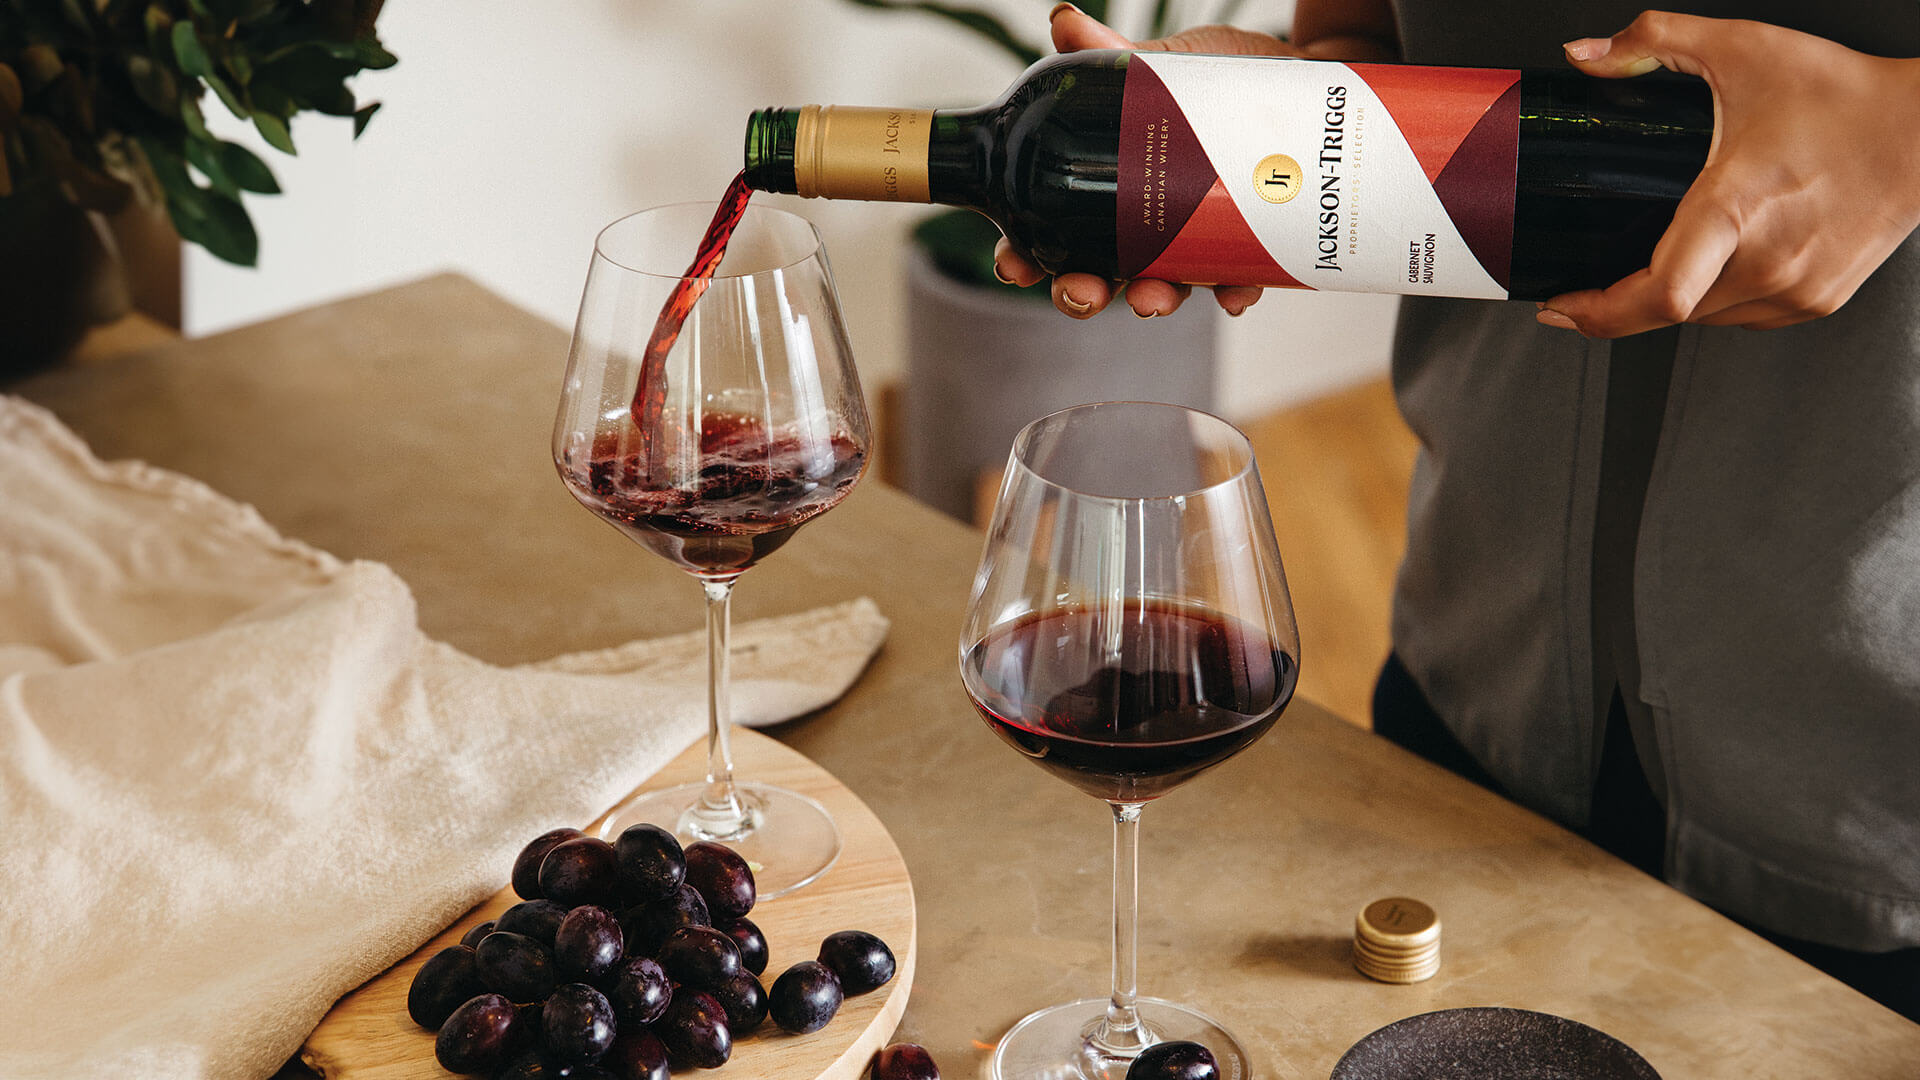 Pouring of Jackson-Triggs Cabernet Sauvignon paired with red grapes.